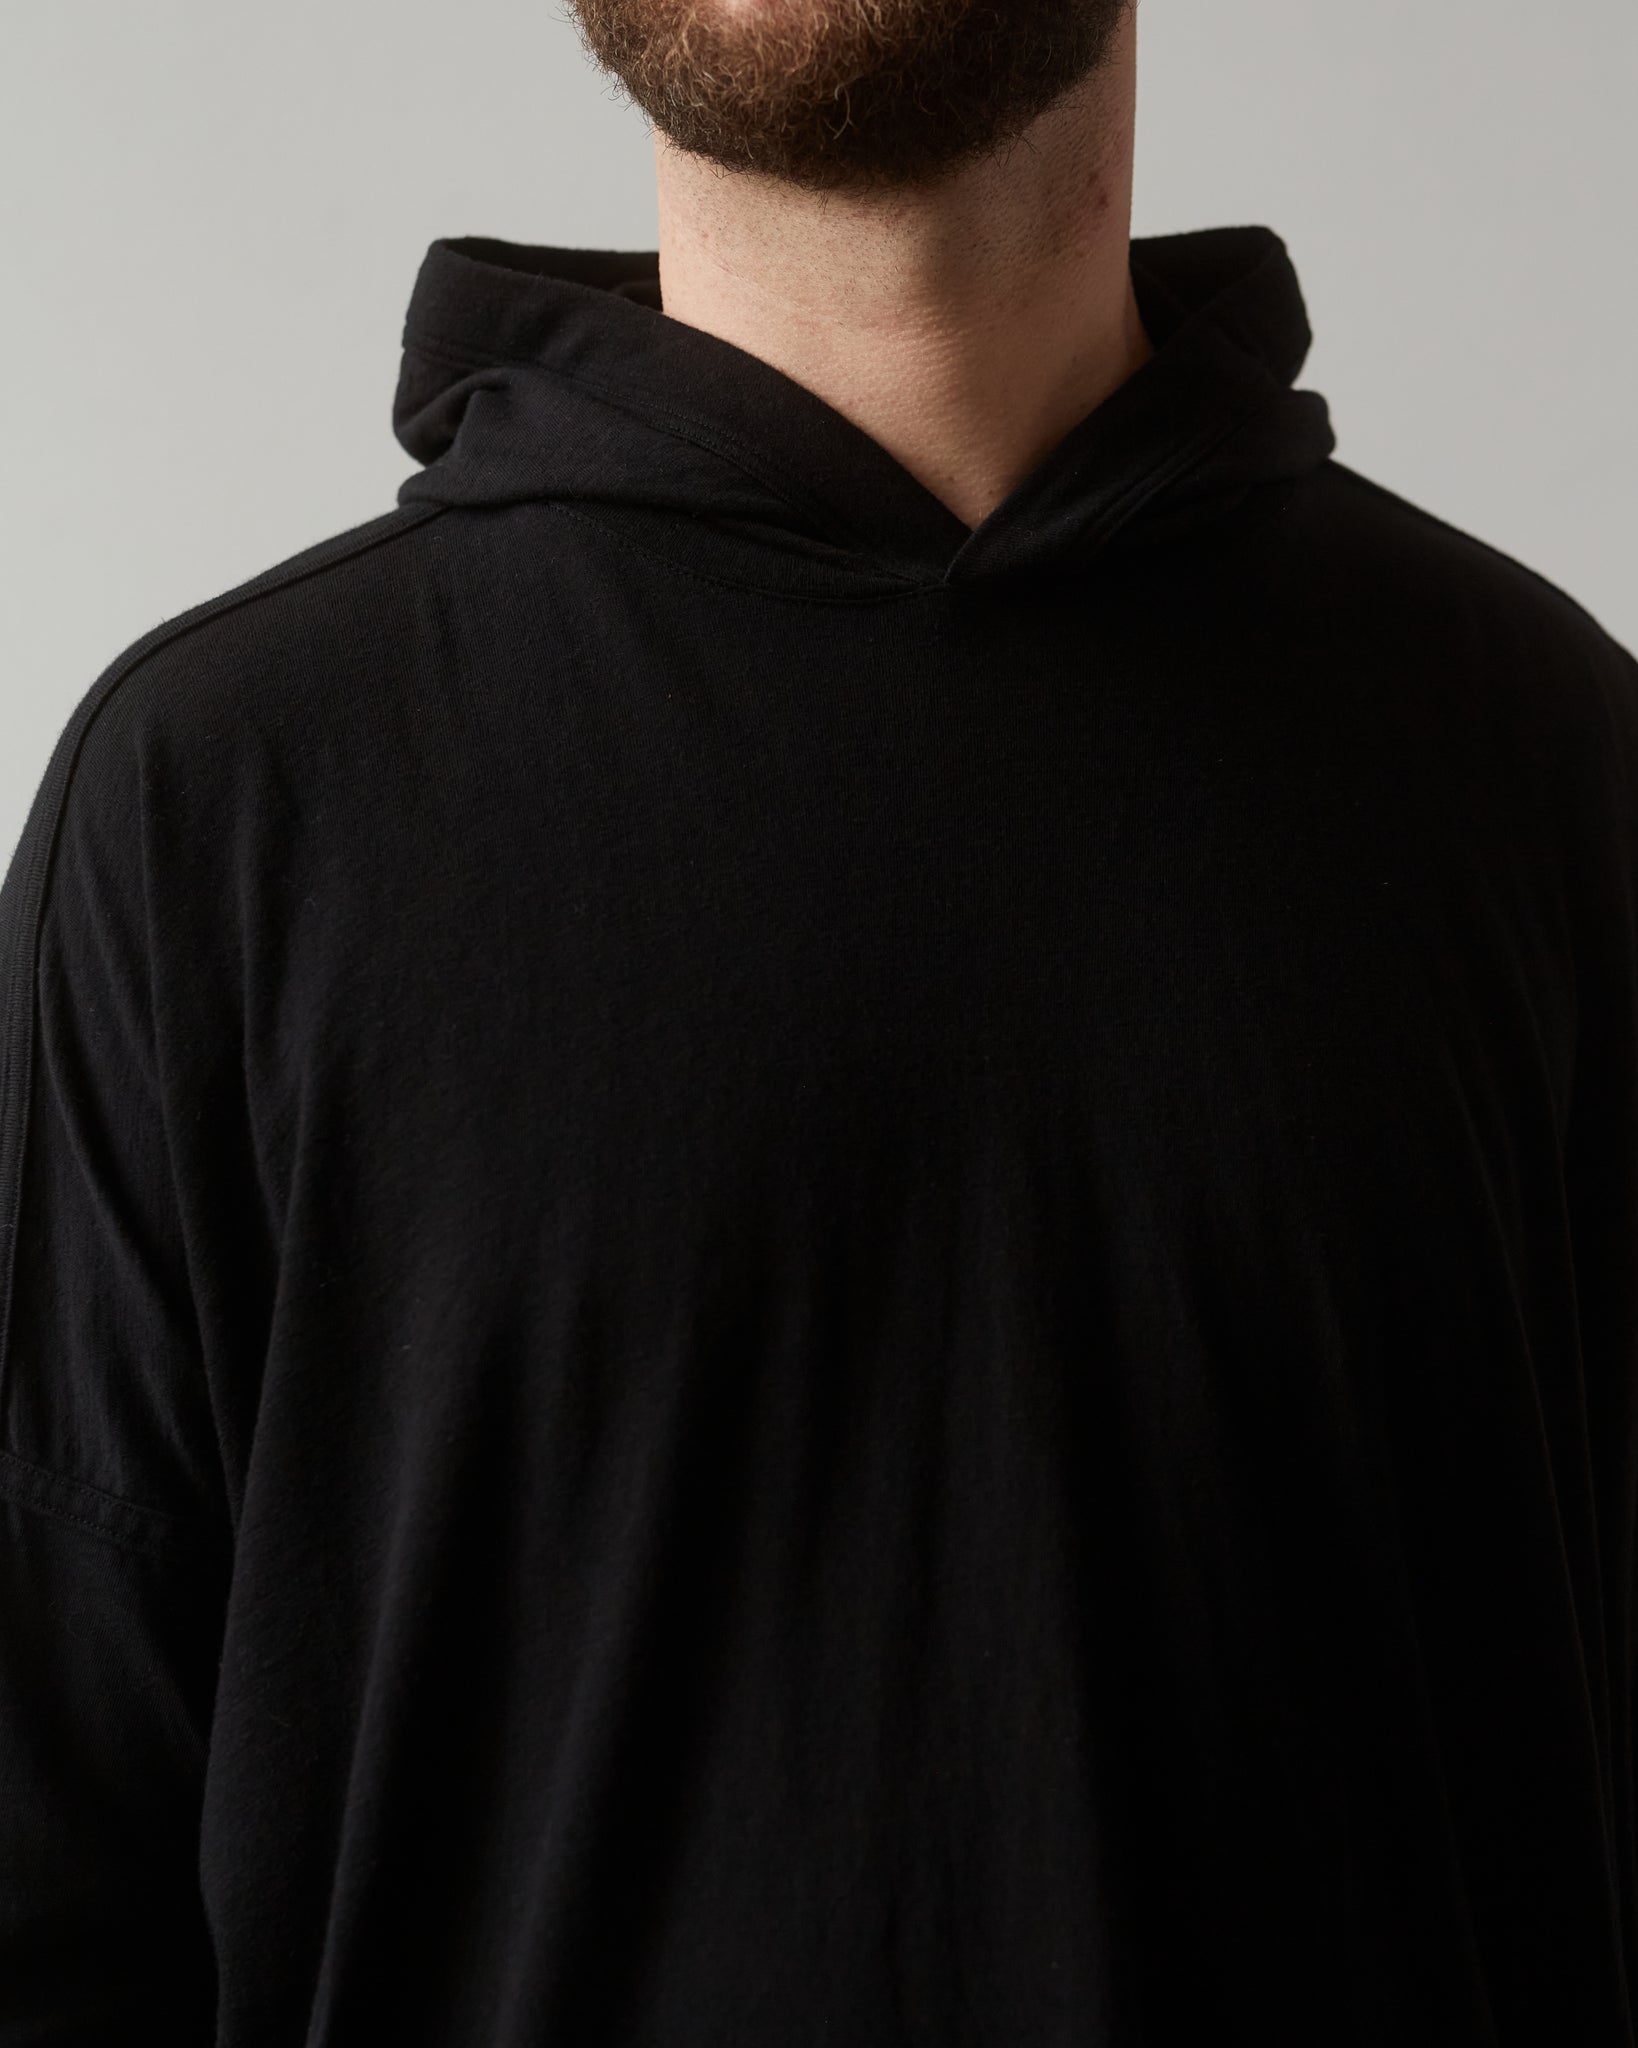 O-Project Hooded LS Tee, Black